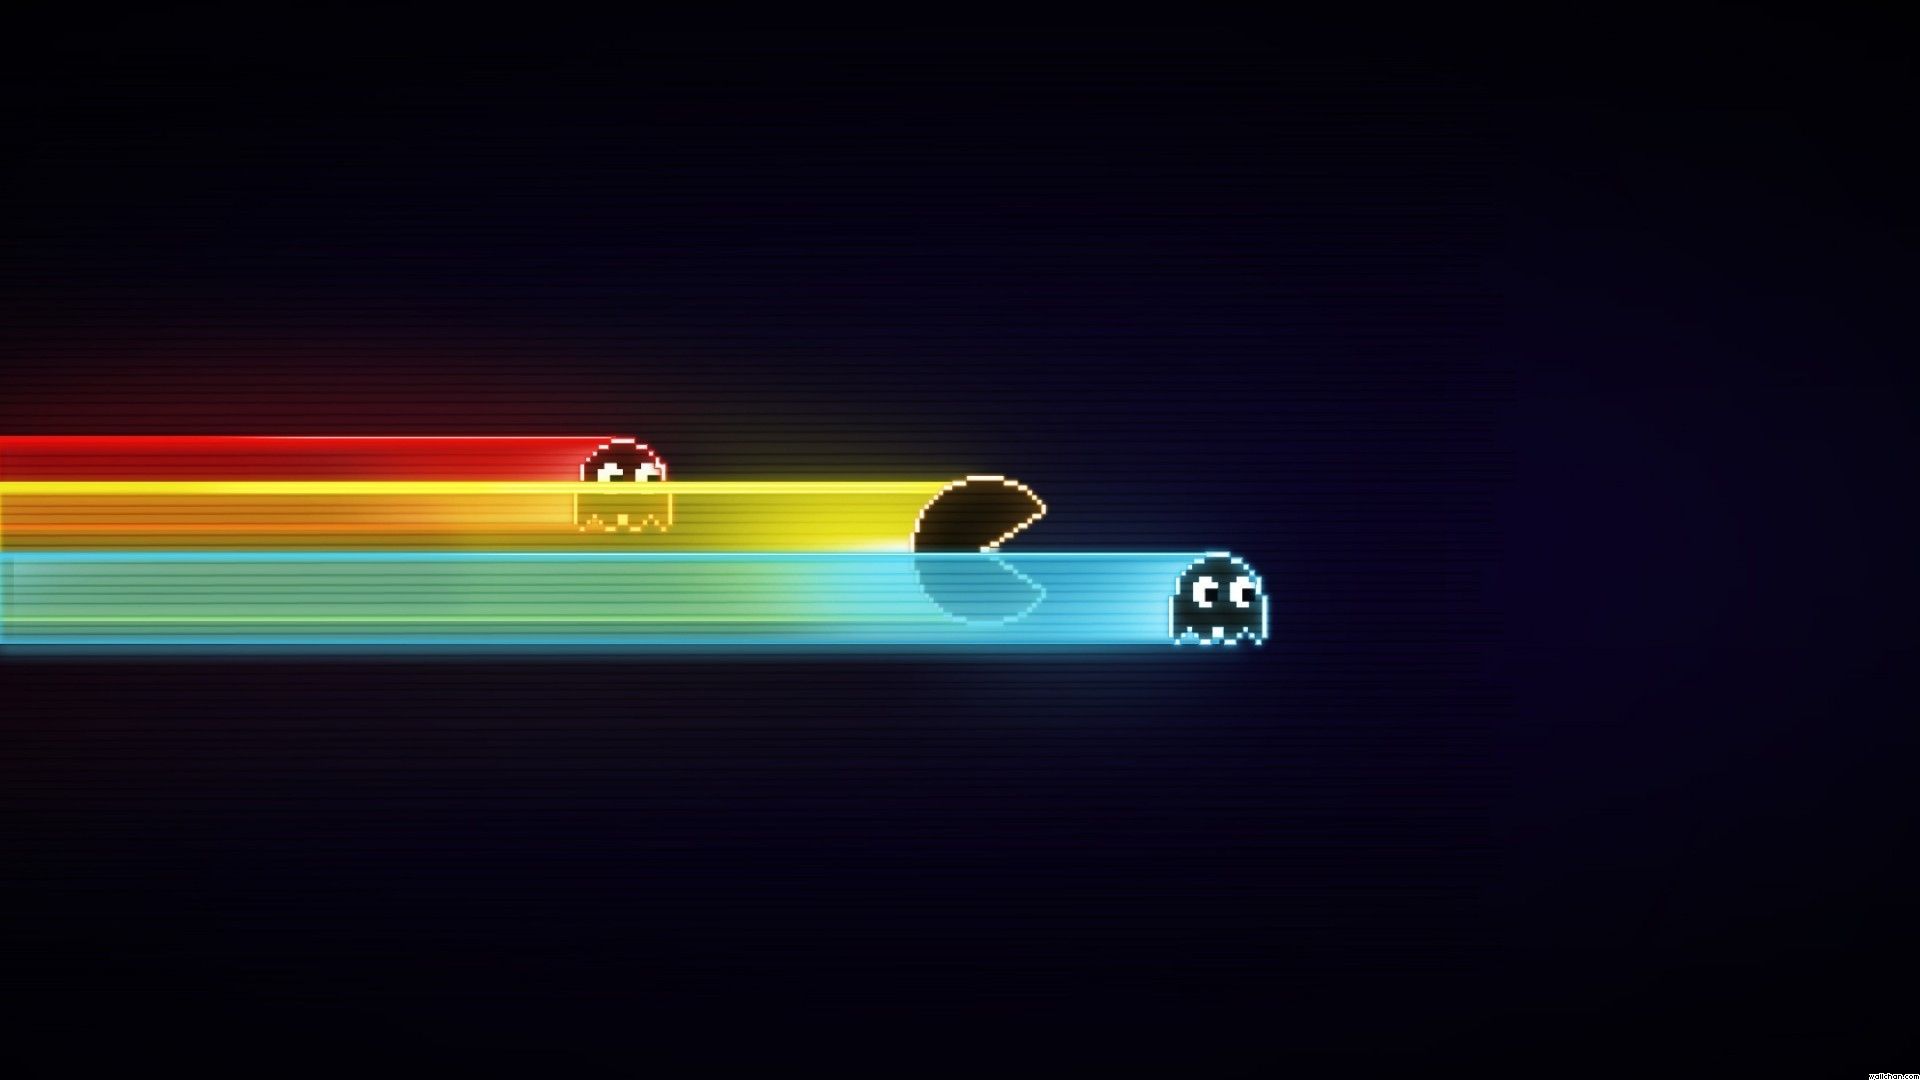 Pac Man Wallpapers Pictures Images HD Wallpapers Download Free Map Images Wallpaper [wallpaper376.blogspot.com]